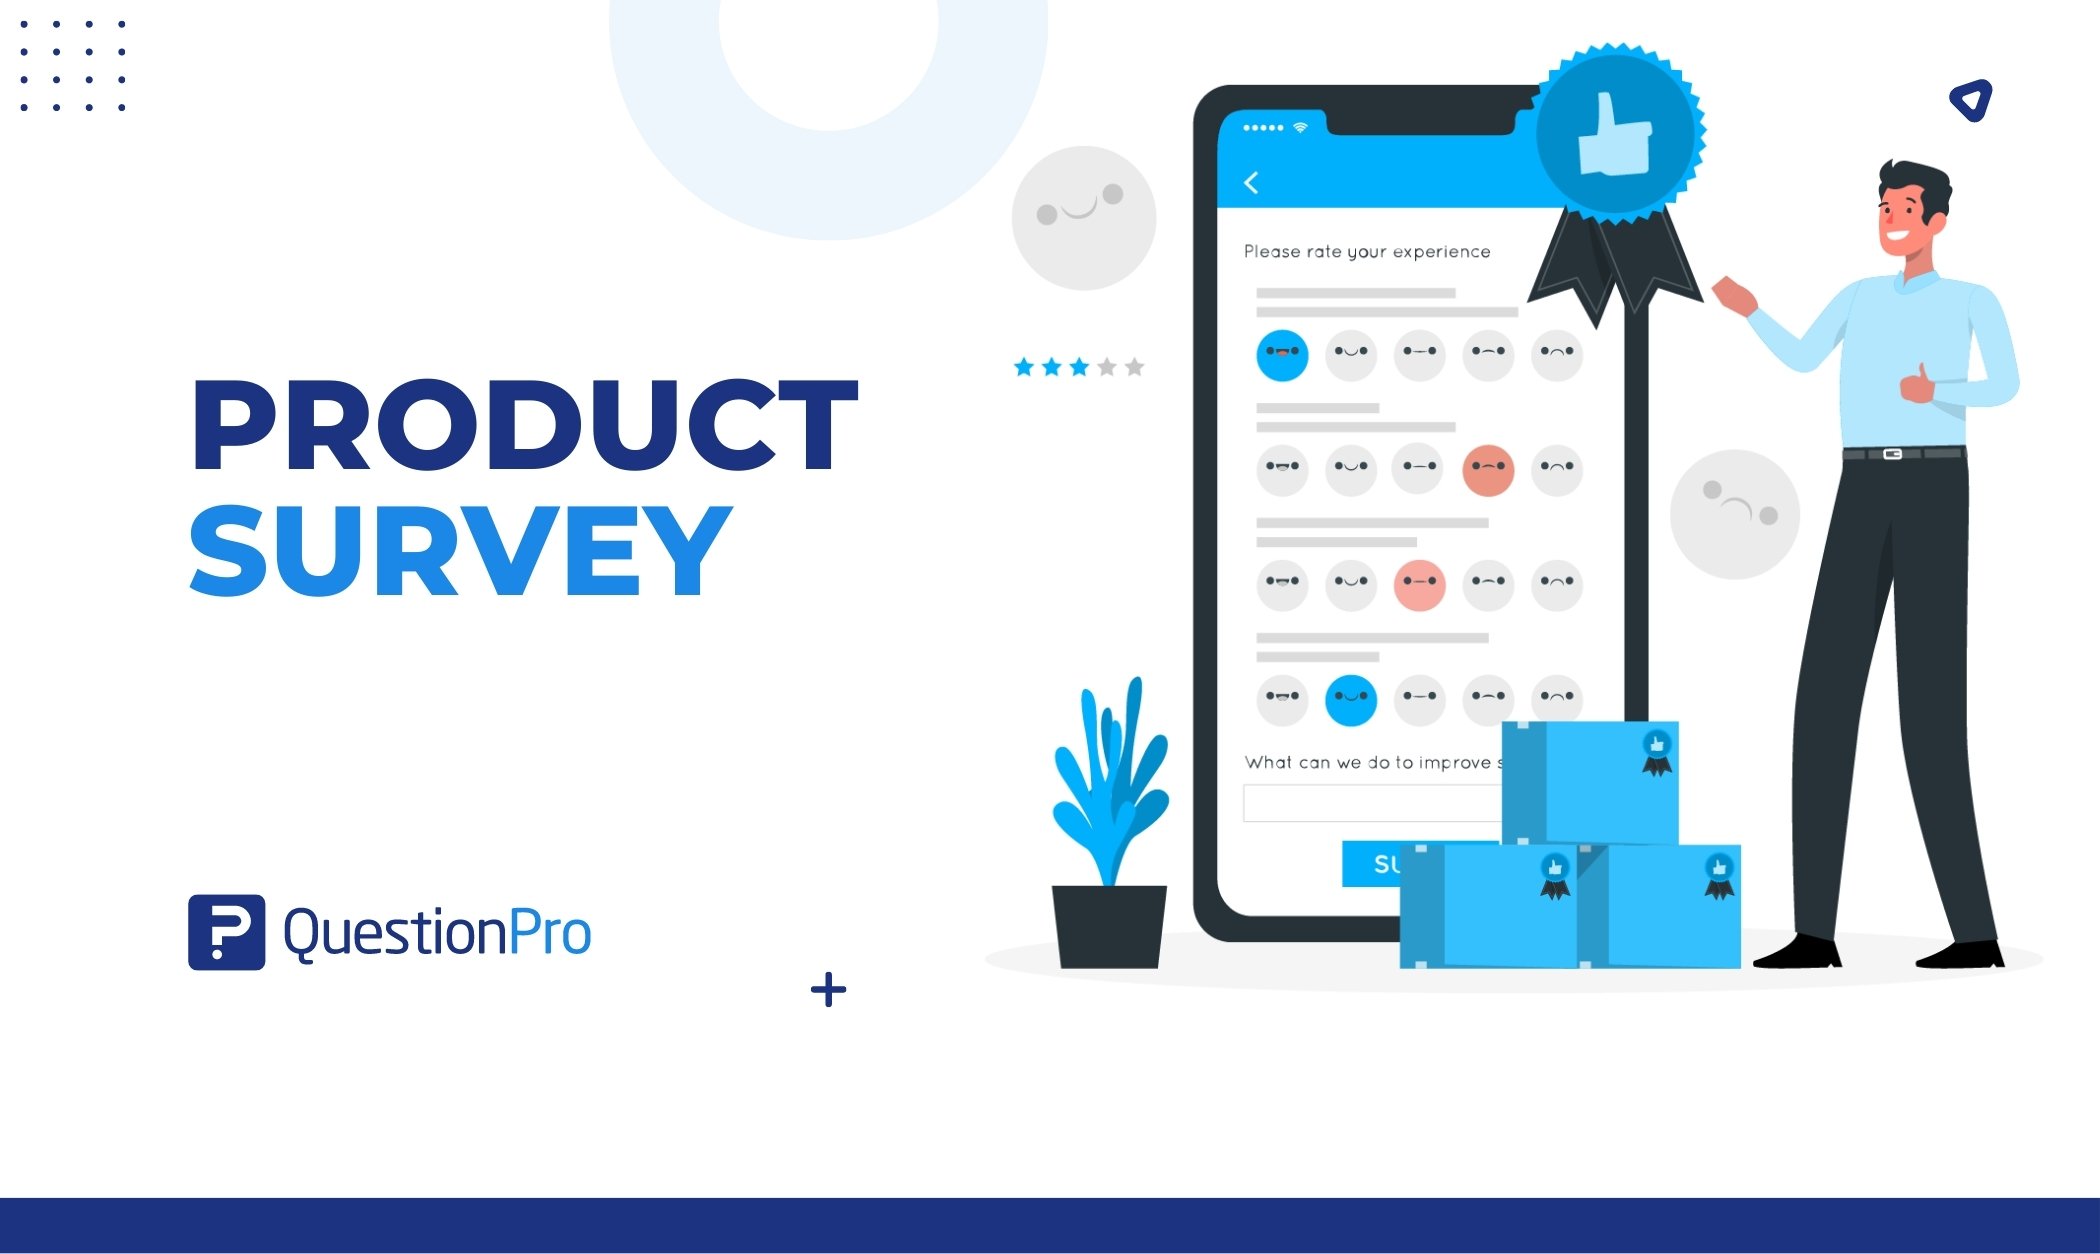 Businesses employ a product survey to gain customer opinions. This survey can be done before, during, and after product development.